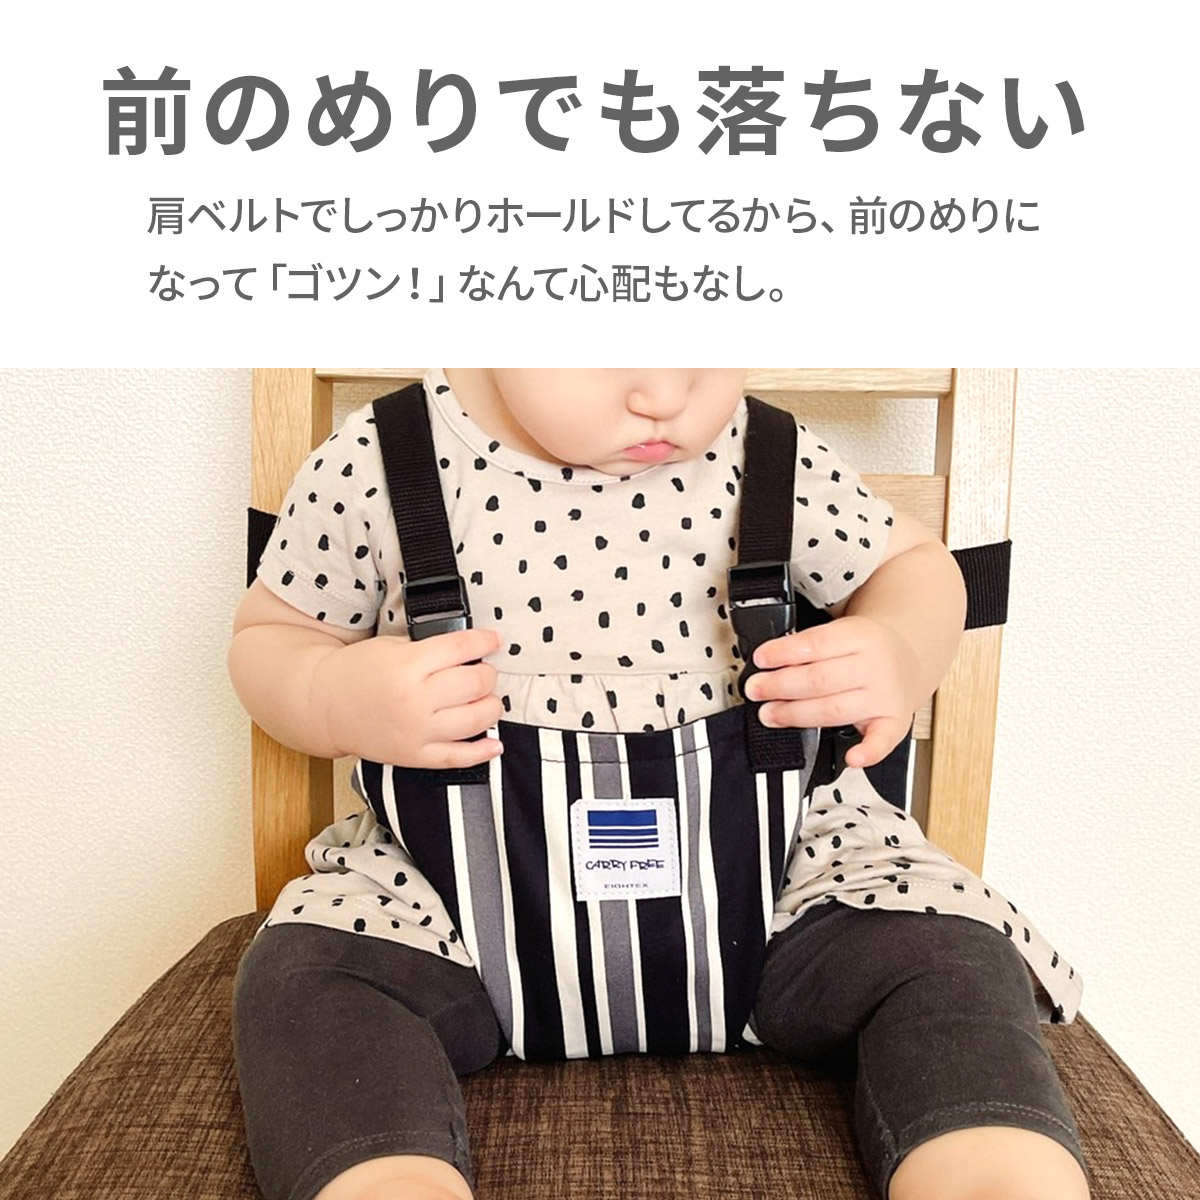 kyali free chair belt Hold shoulder baby shoulder belt baby made in Japan . seat . assistance chair chair rotation . prevention baby chair star pattern regular goods support belt 